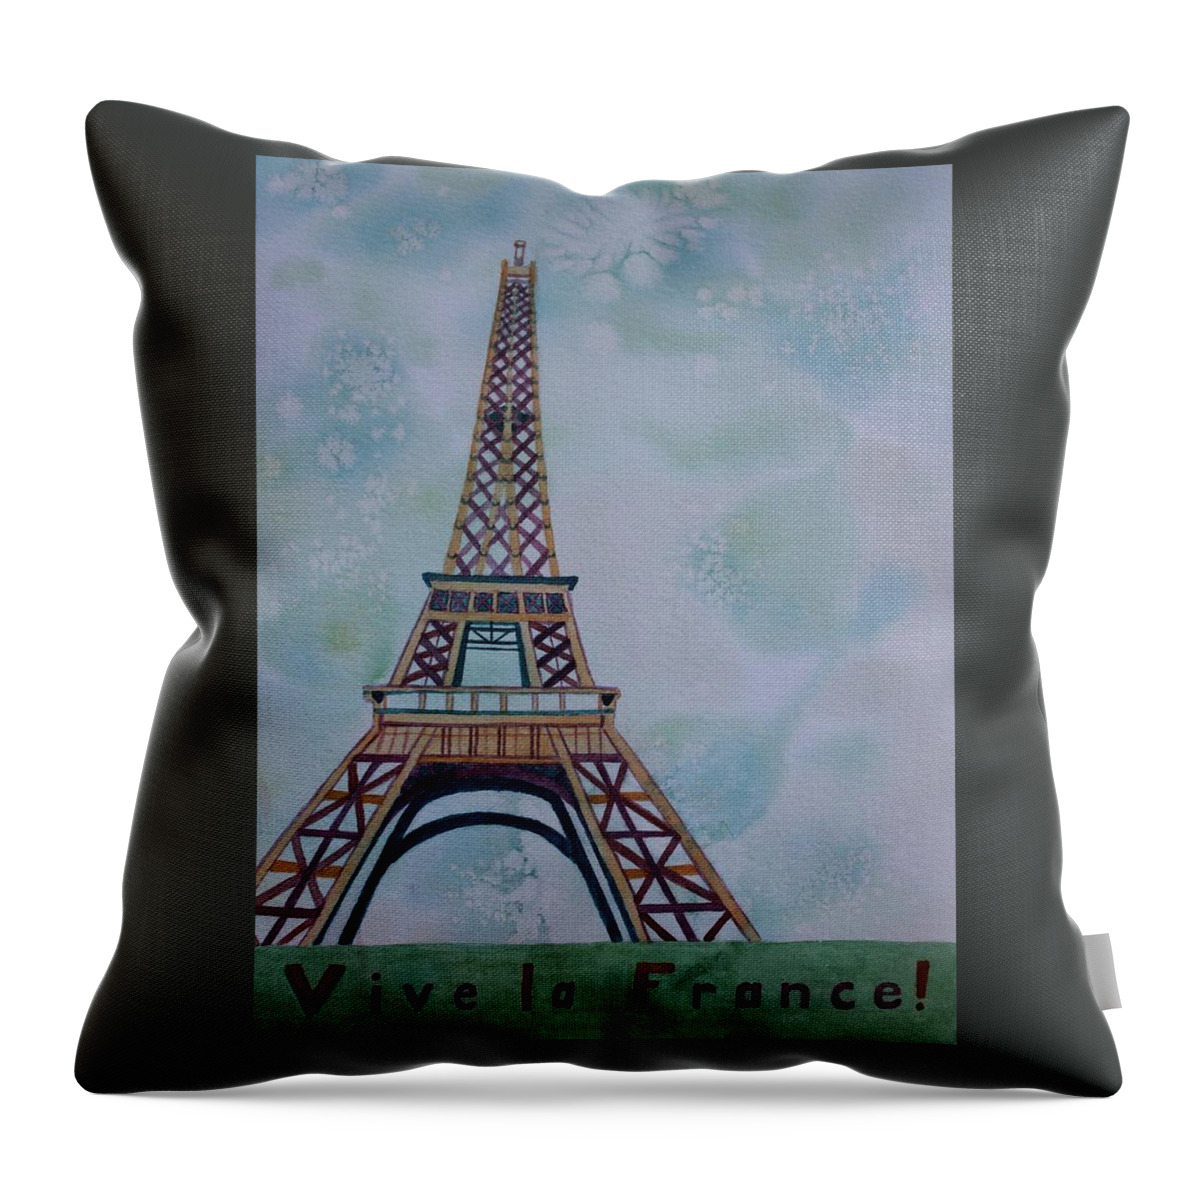 Eiffel Tower Throw Pillow featuring the painting Vive la France by Vera Smith